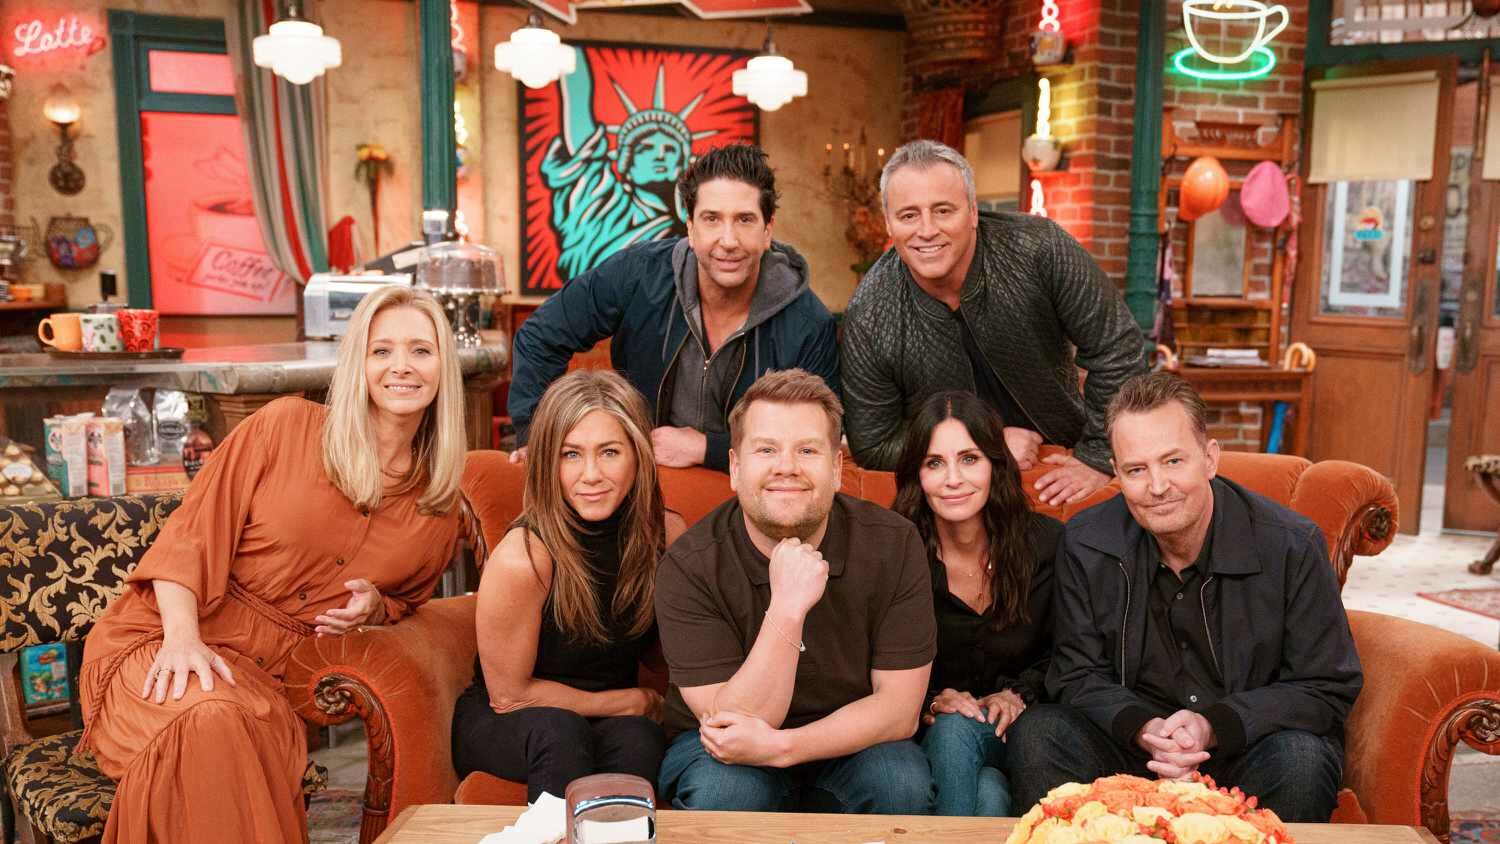 'Friends' Cast in Central Perk Orange Couch James Corden Reunion Special 